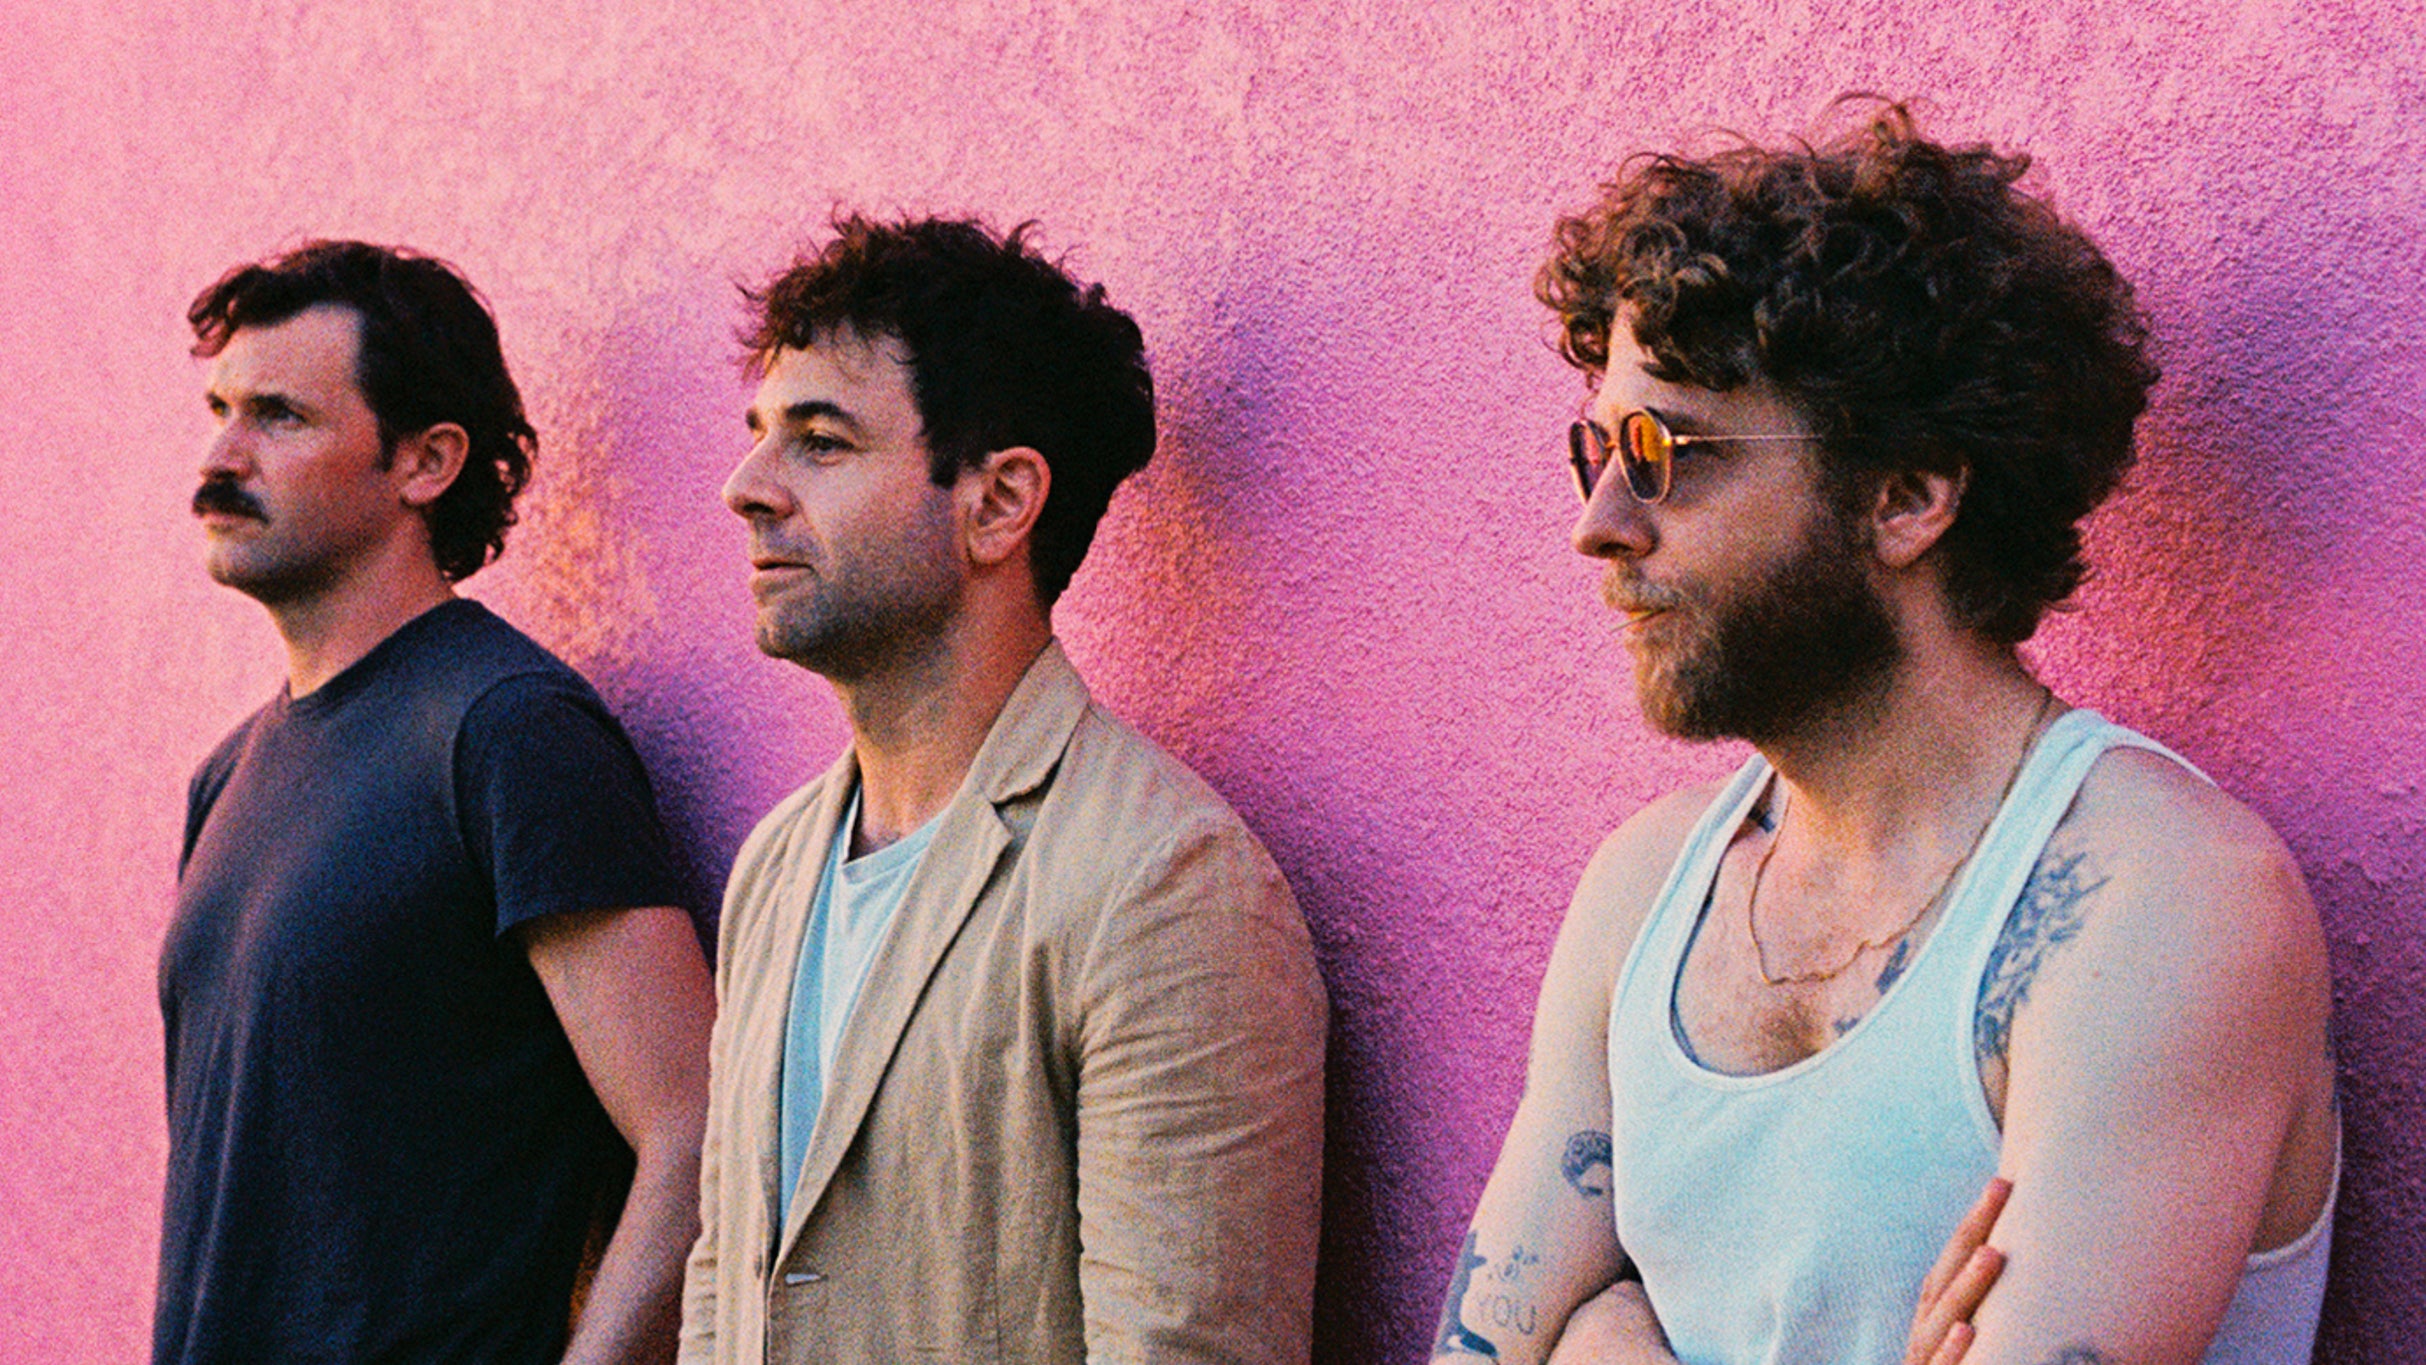 An Evening with Dawes and Lucius free presale code